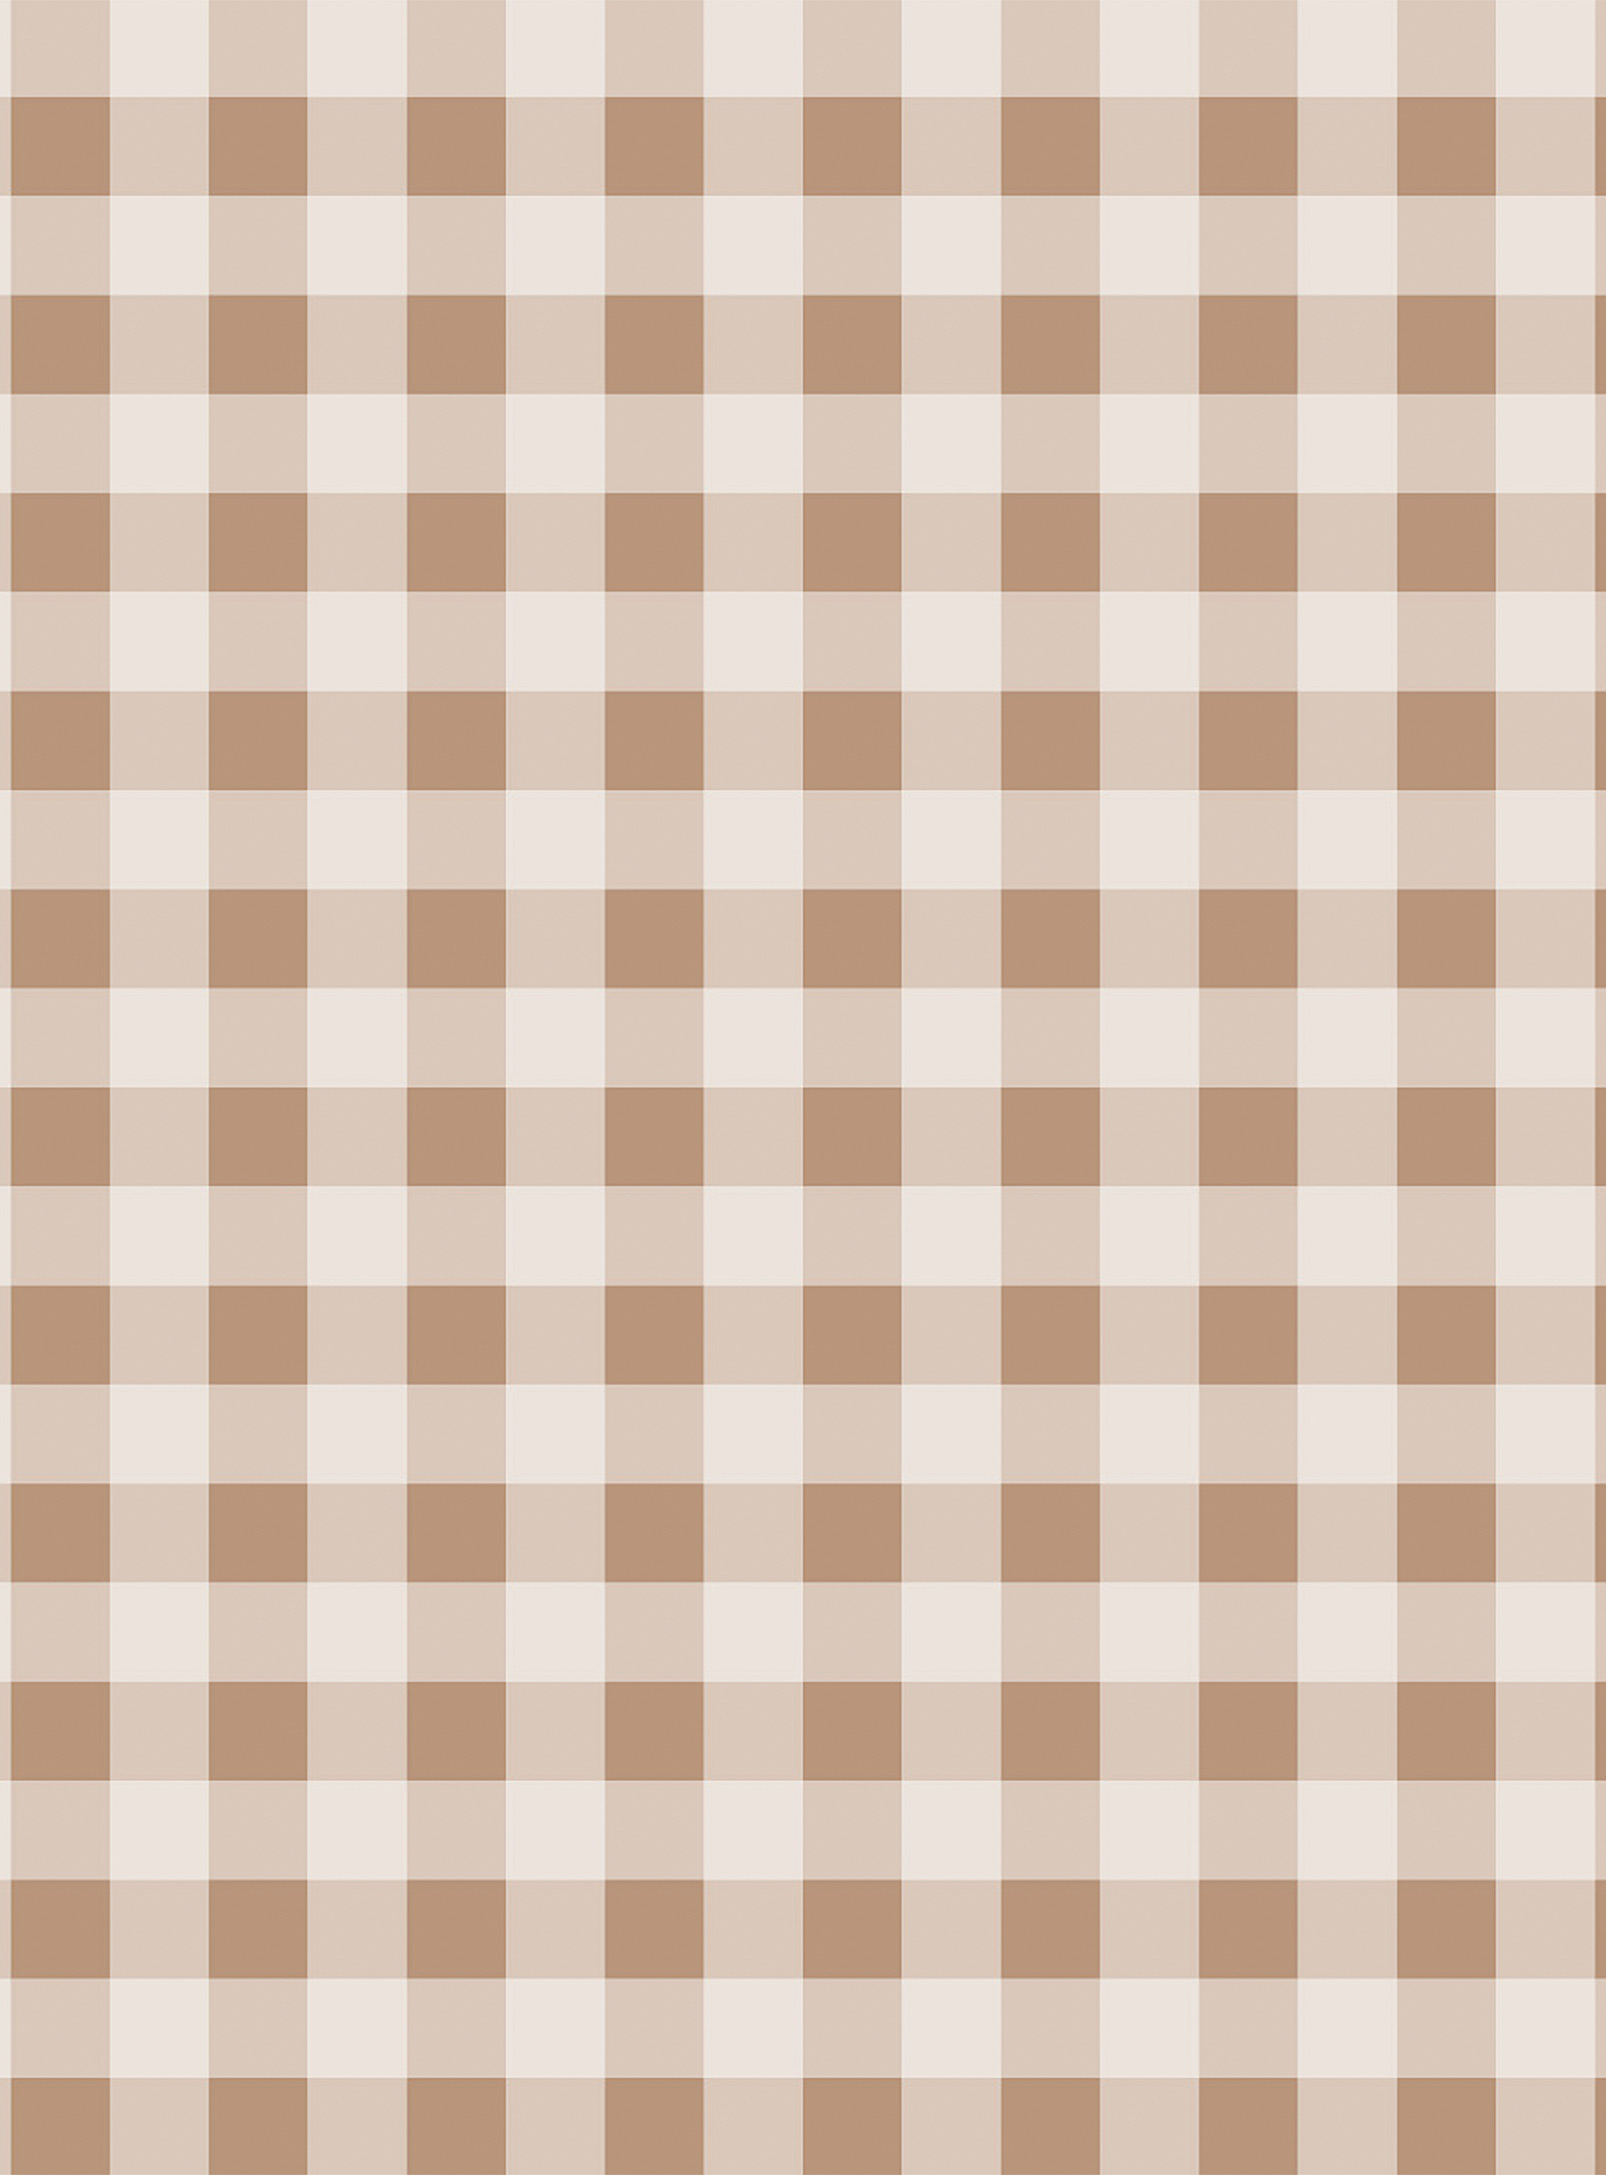 Station D Milan Checkered Wallpaper Strip See Available Sizes In Light Brown